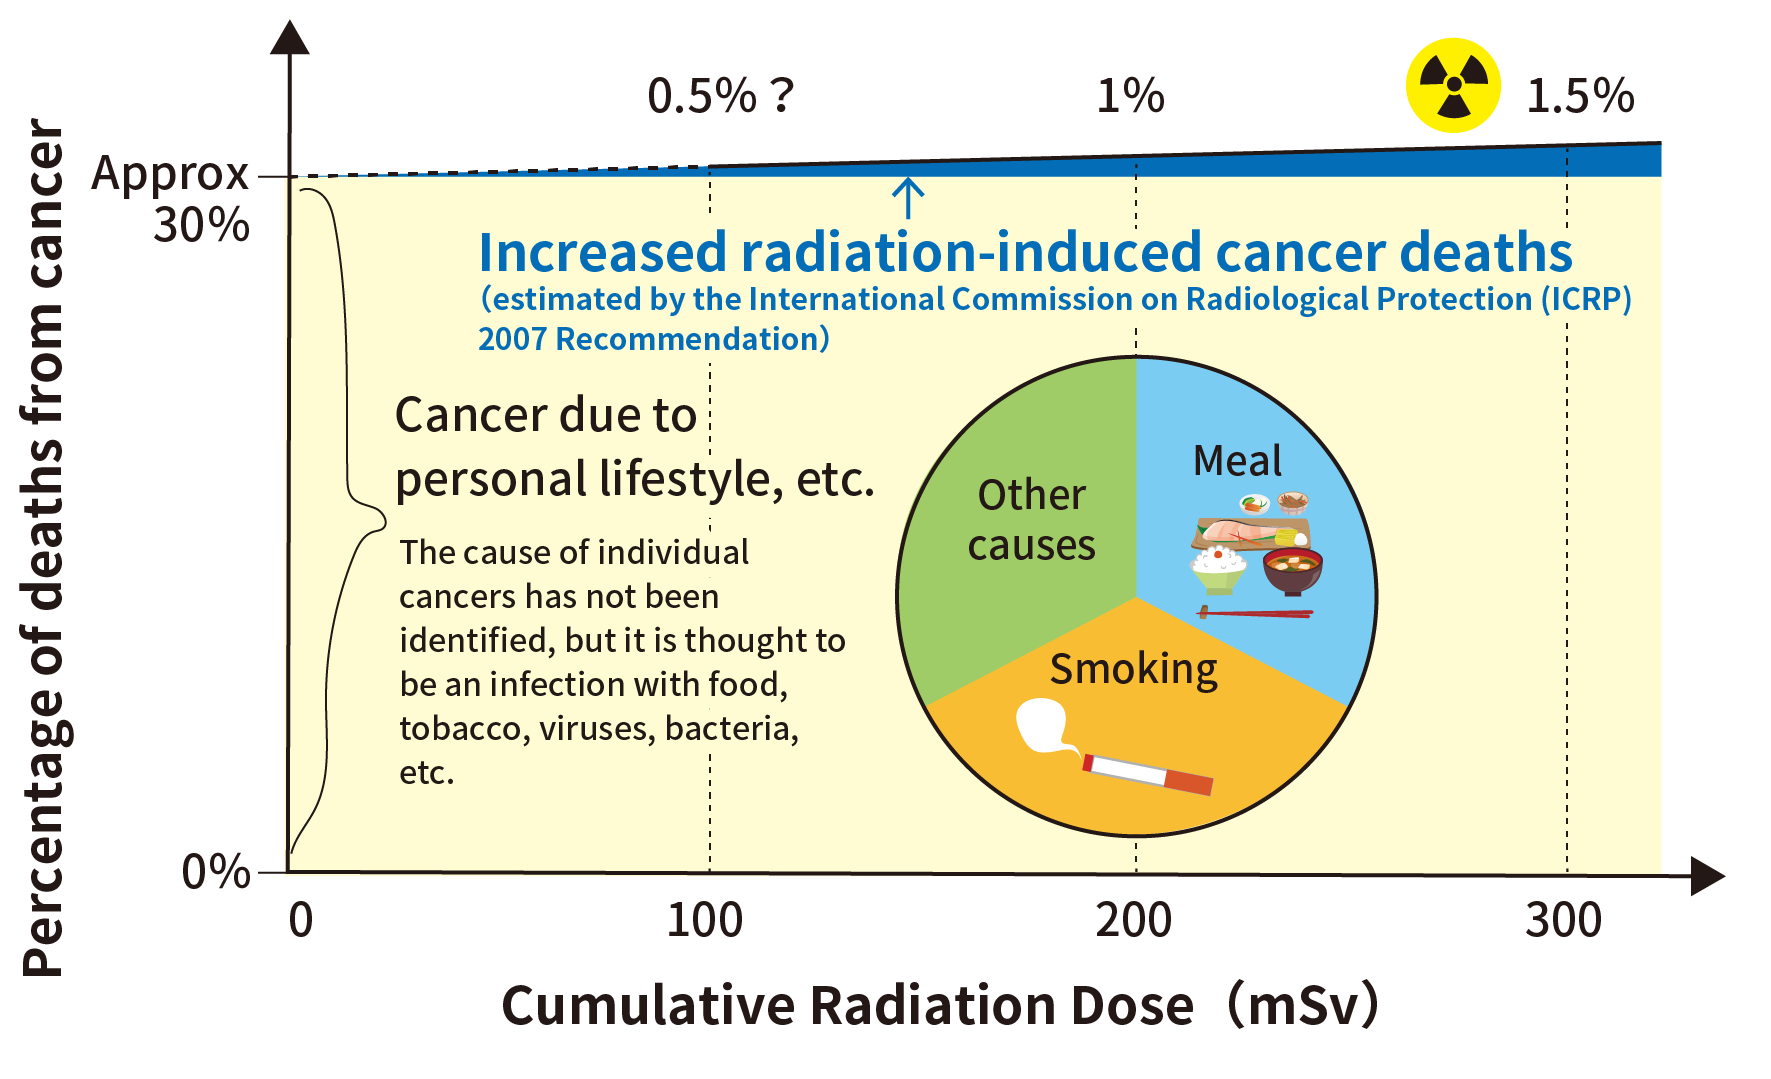 Risk of cancer death from low dose rate exposure